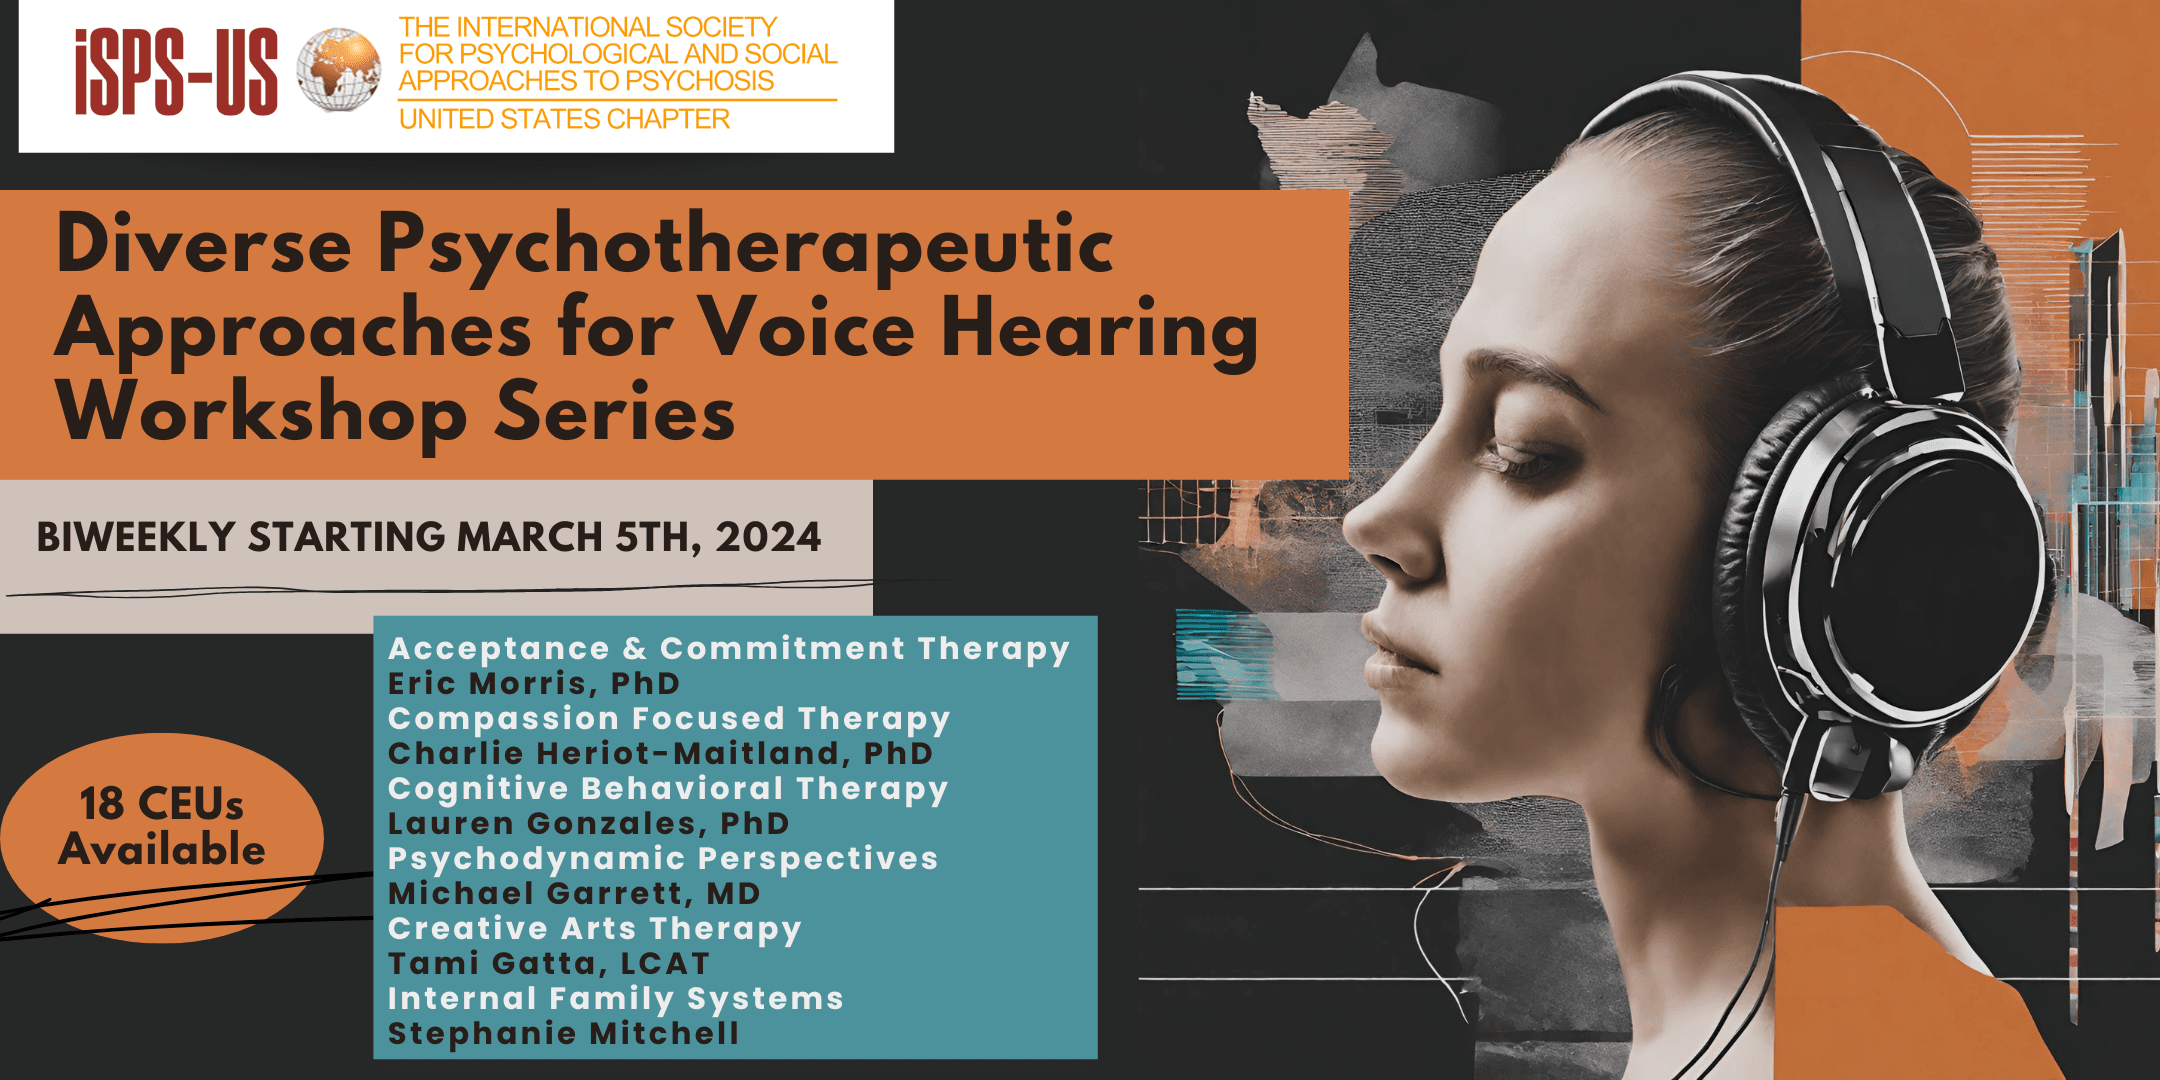 3/5/24 - 5/28/24 | Diverse Psychotherapeutic Approaches for Voice Hearing